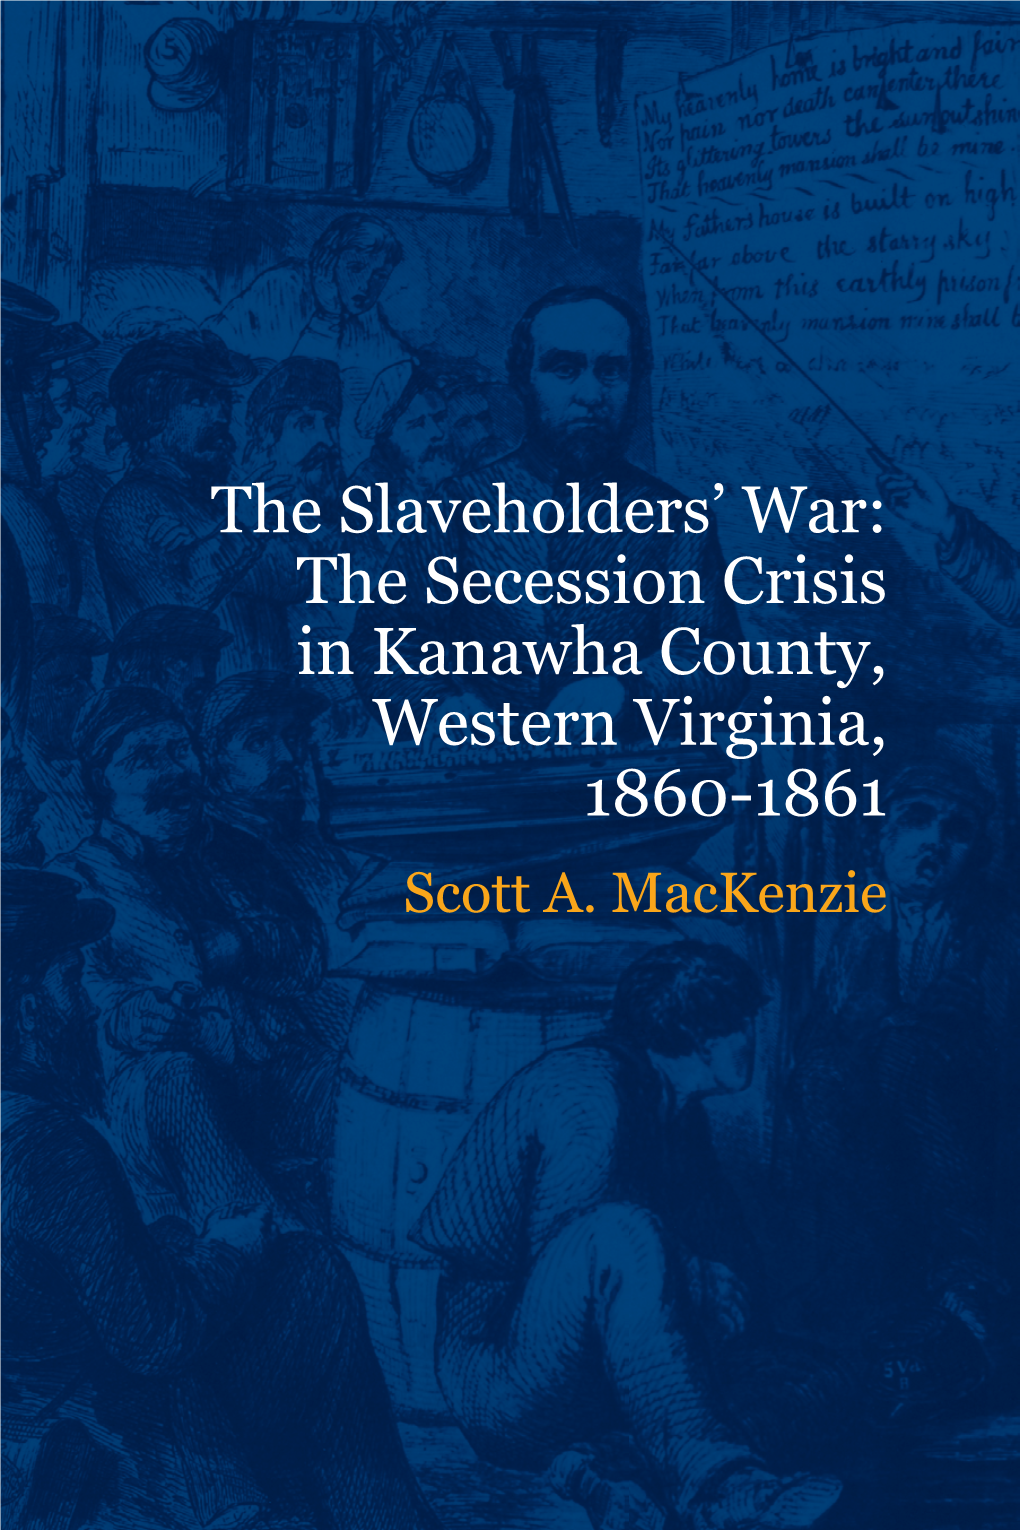 The Secession Crisis in Kanawha County, Western Virginia, 1860-1861 Scott A